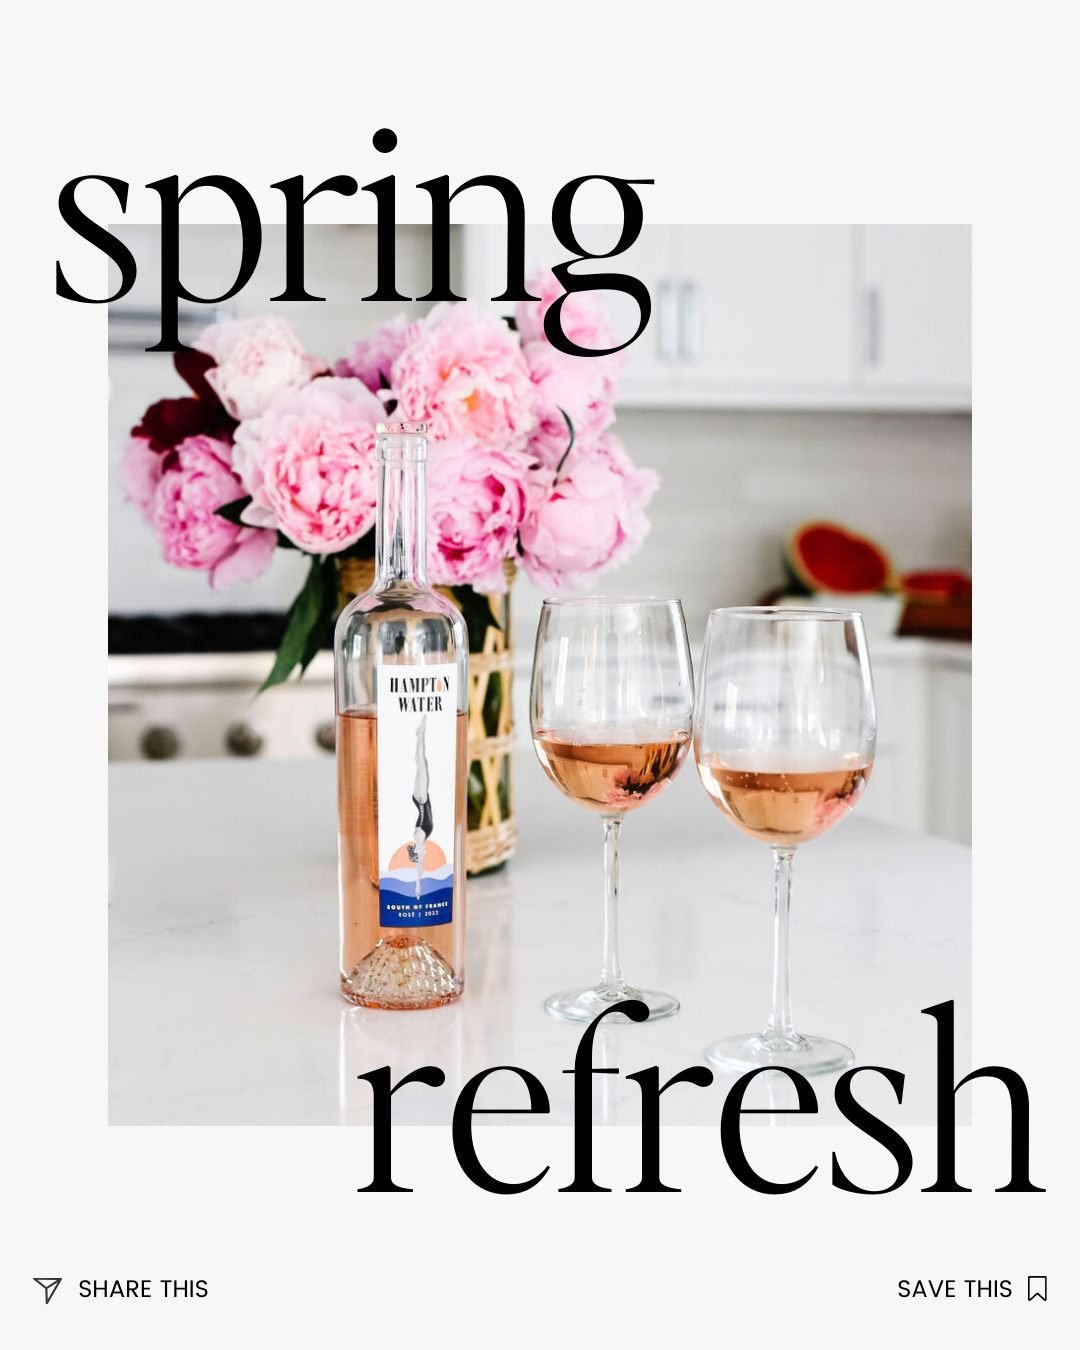 It&rsquo;s time to welcome the fresh energy of spring into your home!⁣
⁣
Swipe for what to do to update your haven for the new season.⁣
⁣
Bonus Tip: Don&rsquo;t forget the finishing touches! Fresh floral arrangements and candles can instantly elevate